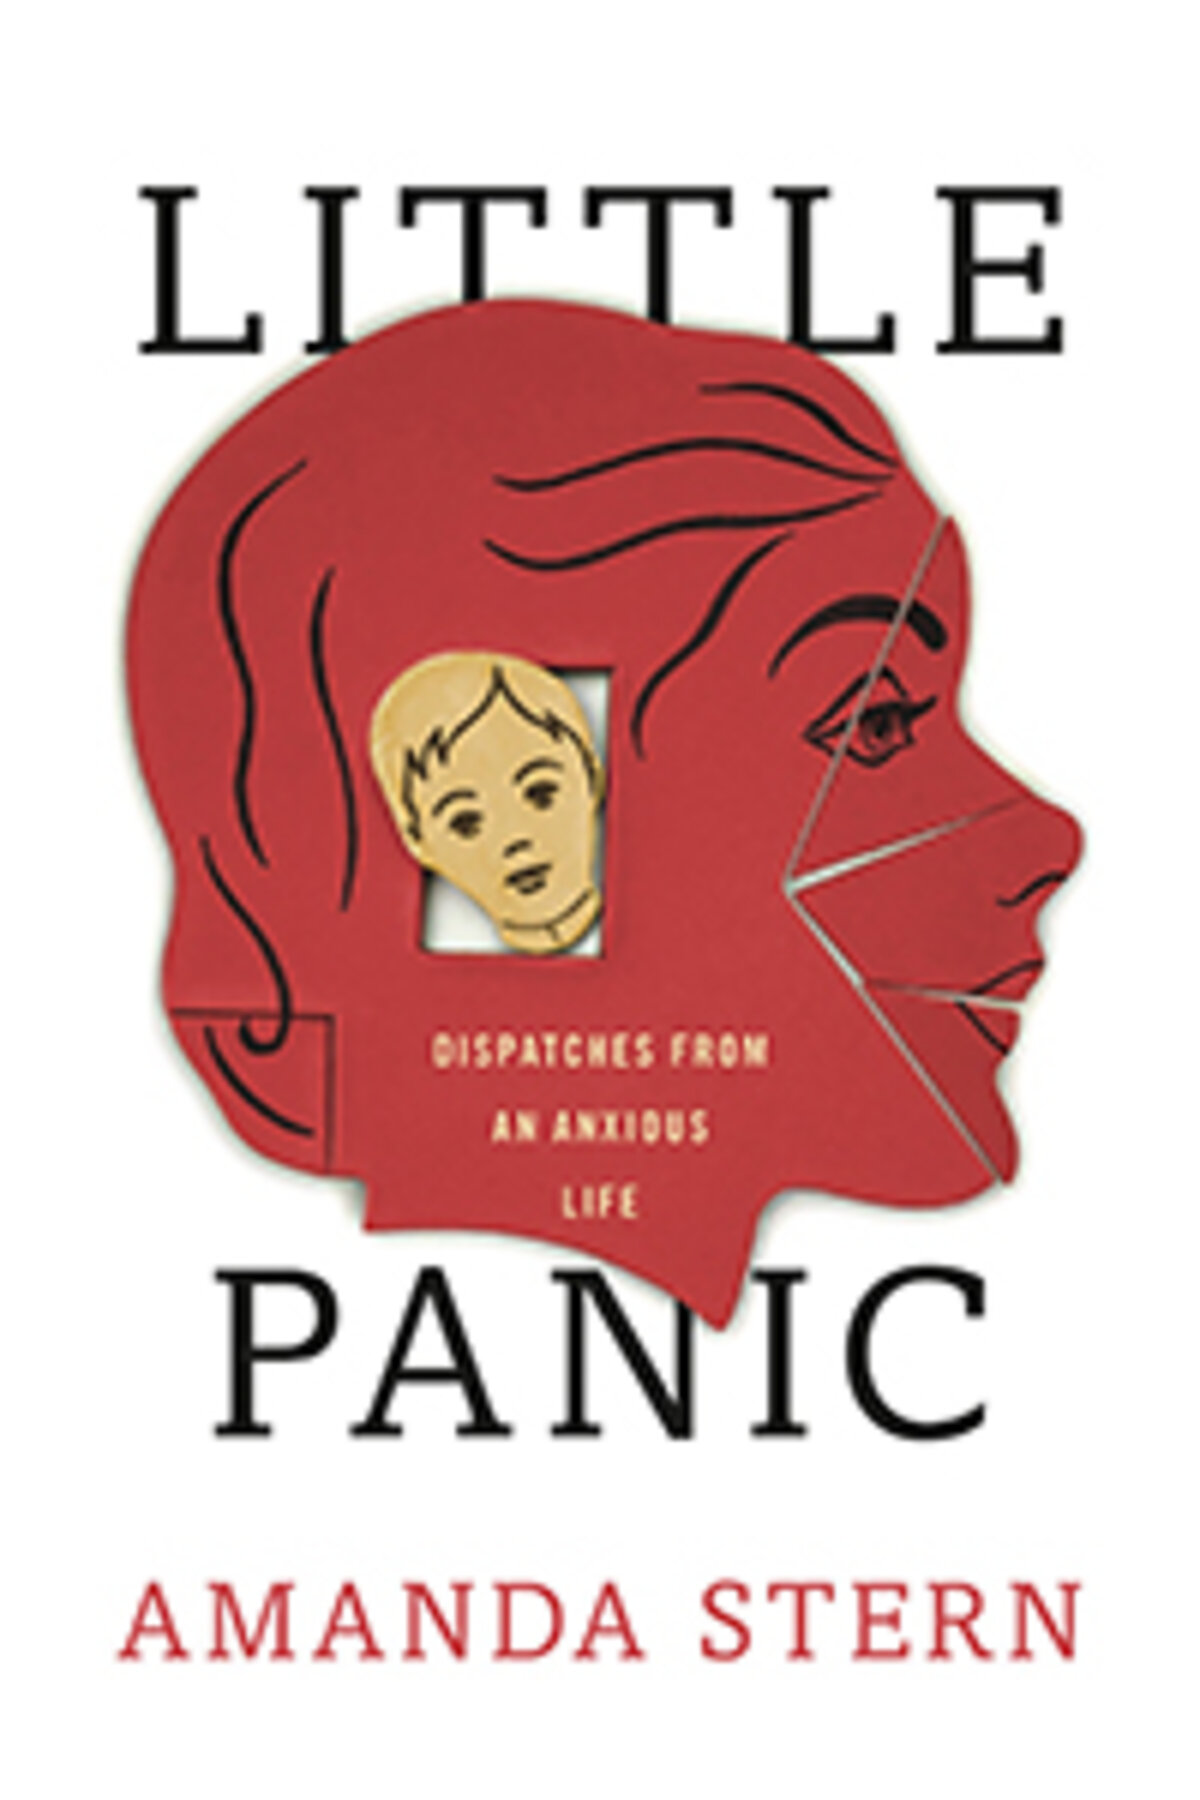 Profile of head, colored red with smaller yellow head on book cover of Little Panic by Amanda Stern